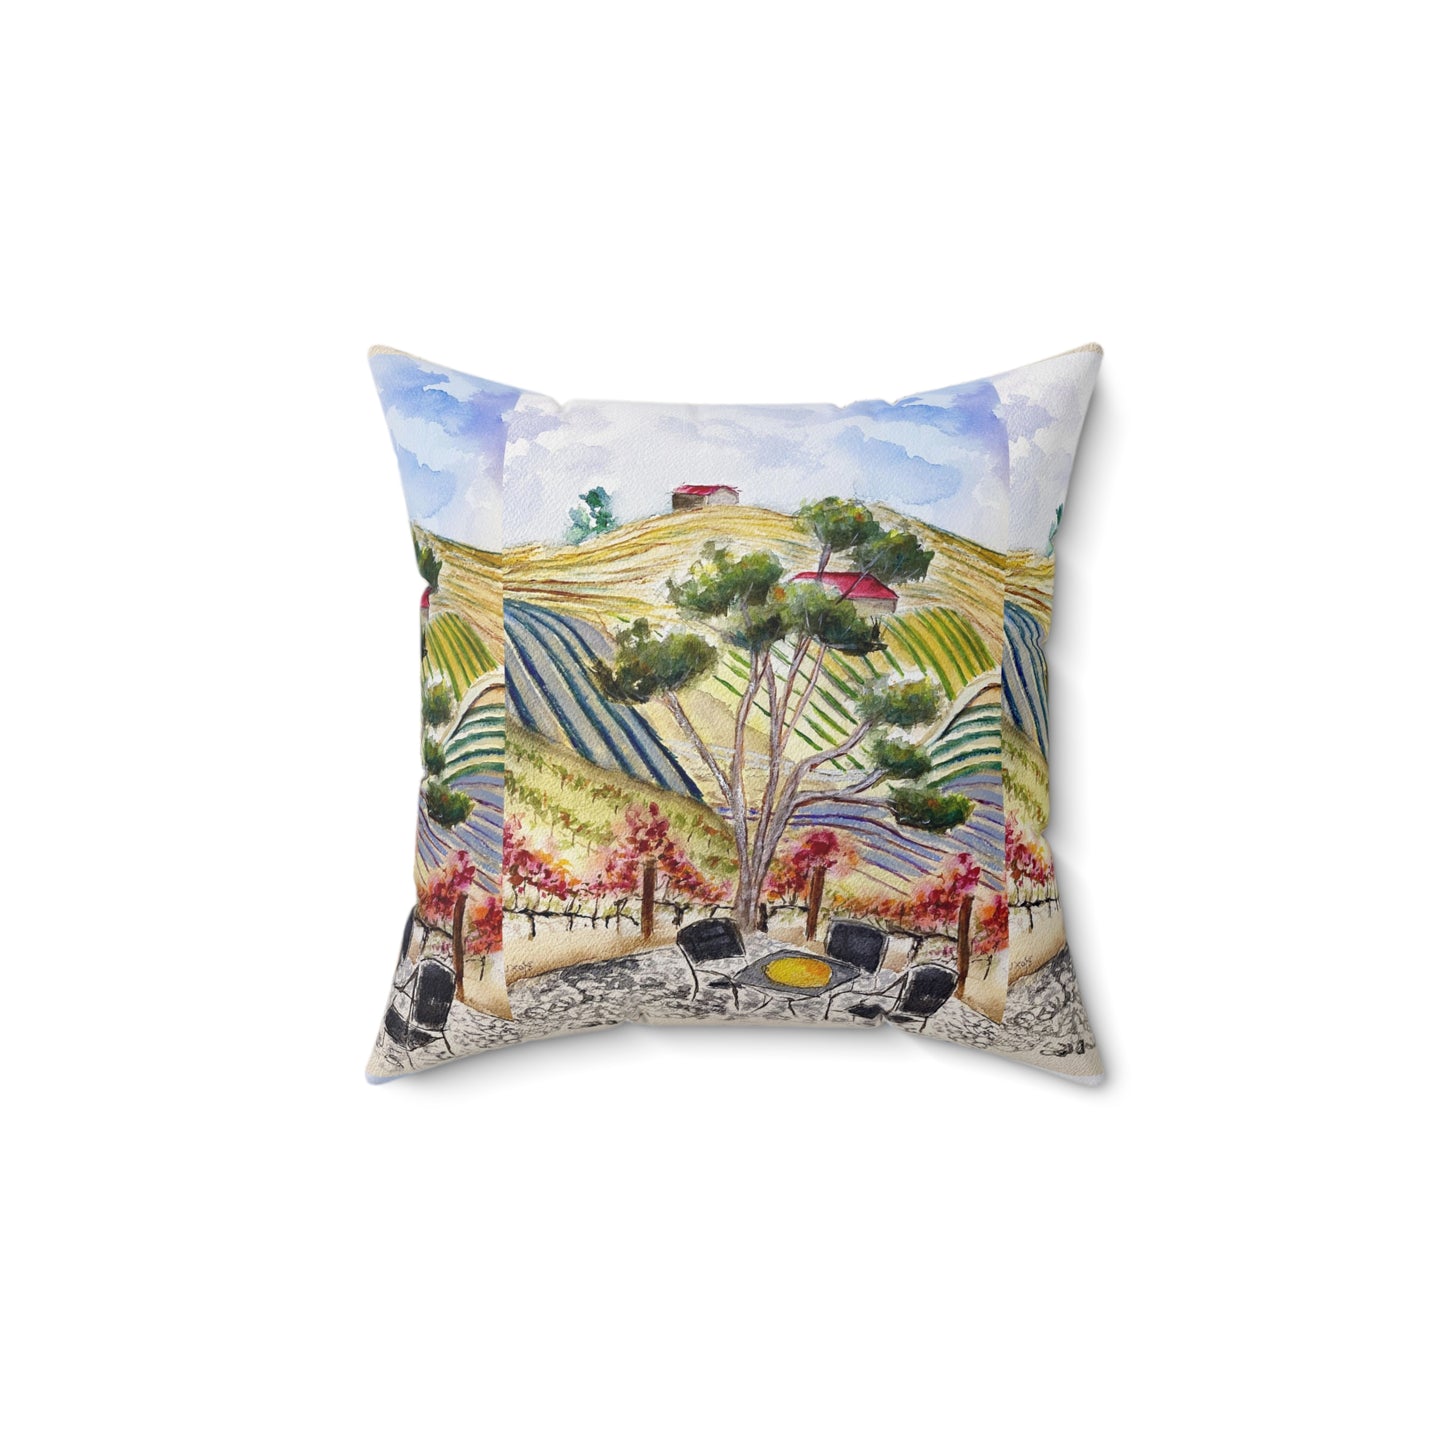 View from the Patio at GBV Indoor Spun Polyester Square Pillow